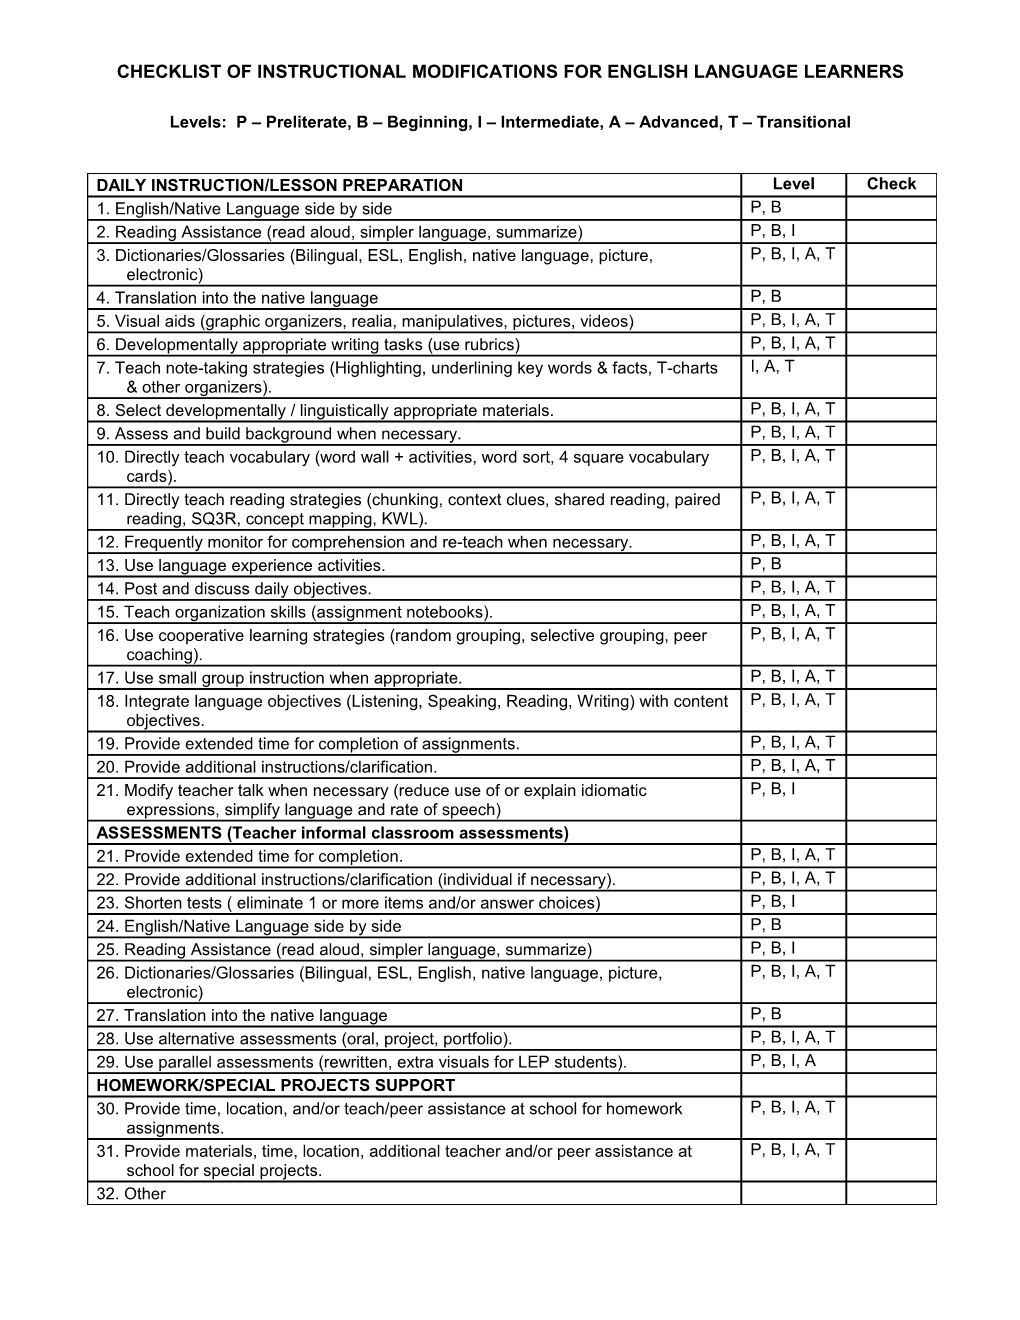 Checklist of Instructional Modifications for English Language Learners